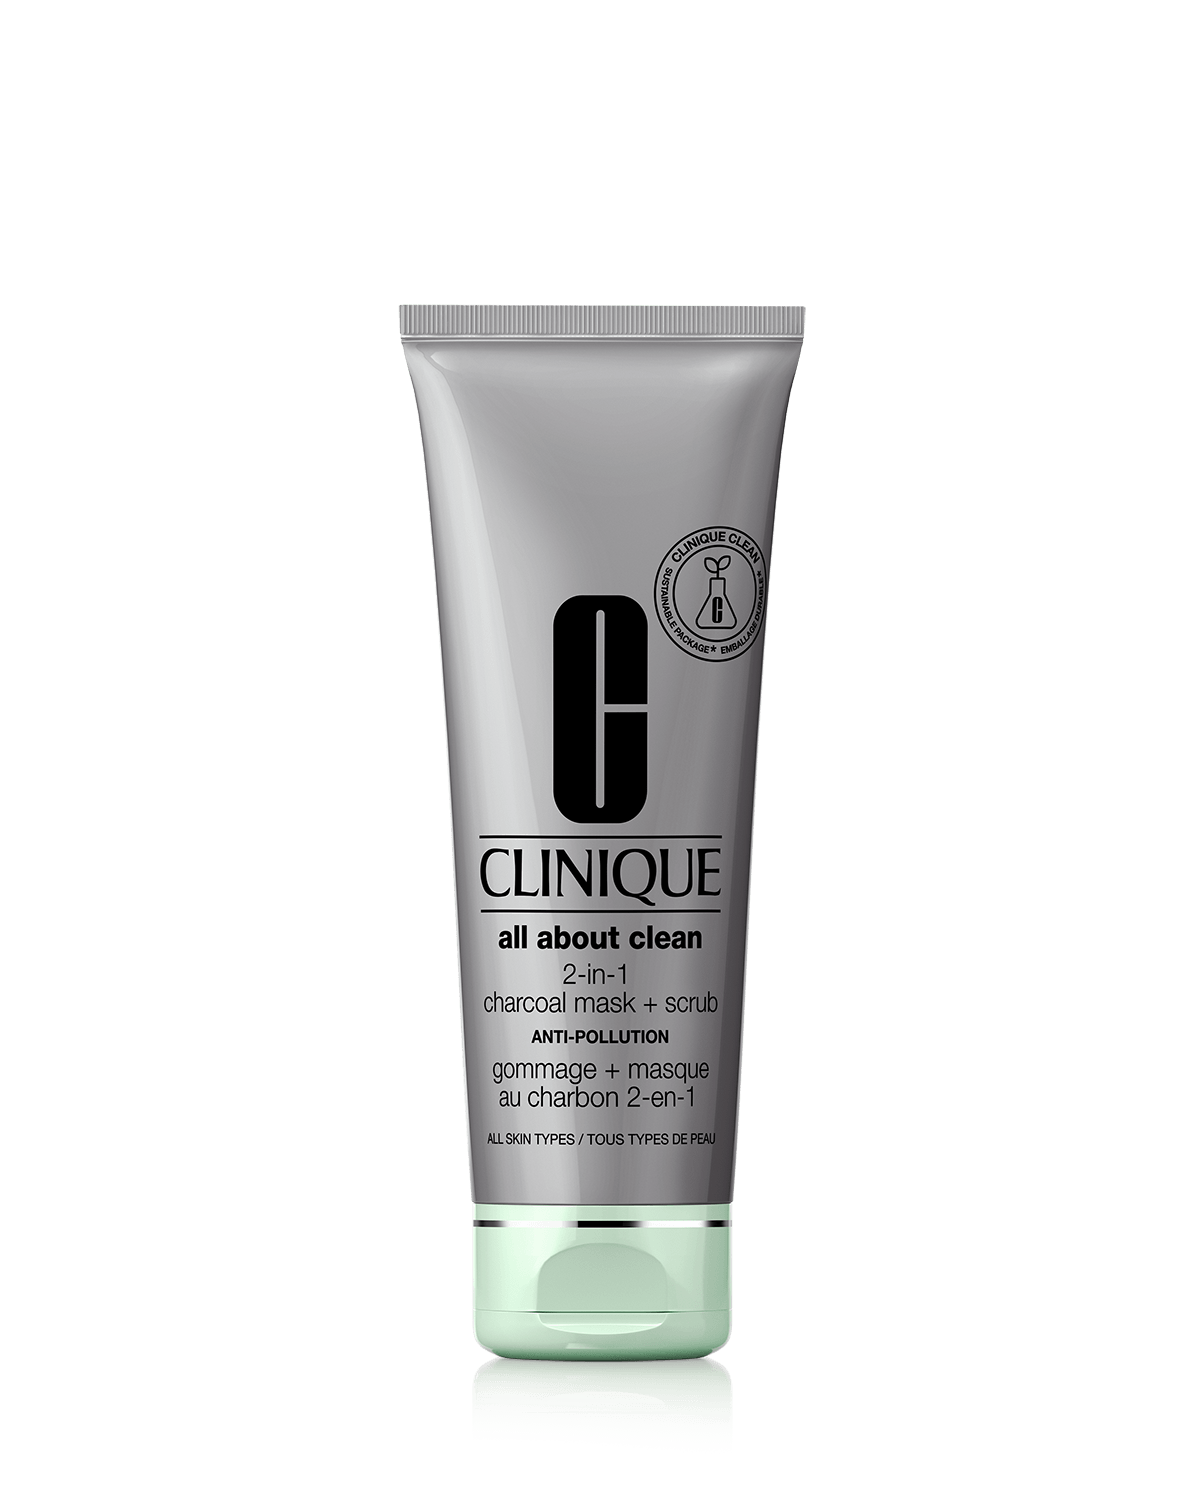 Clinique All About Clean 2-in-1 Charcoal Mask + Scrub